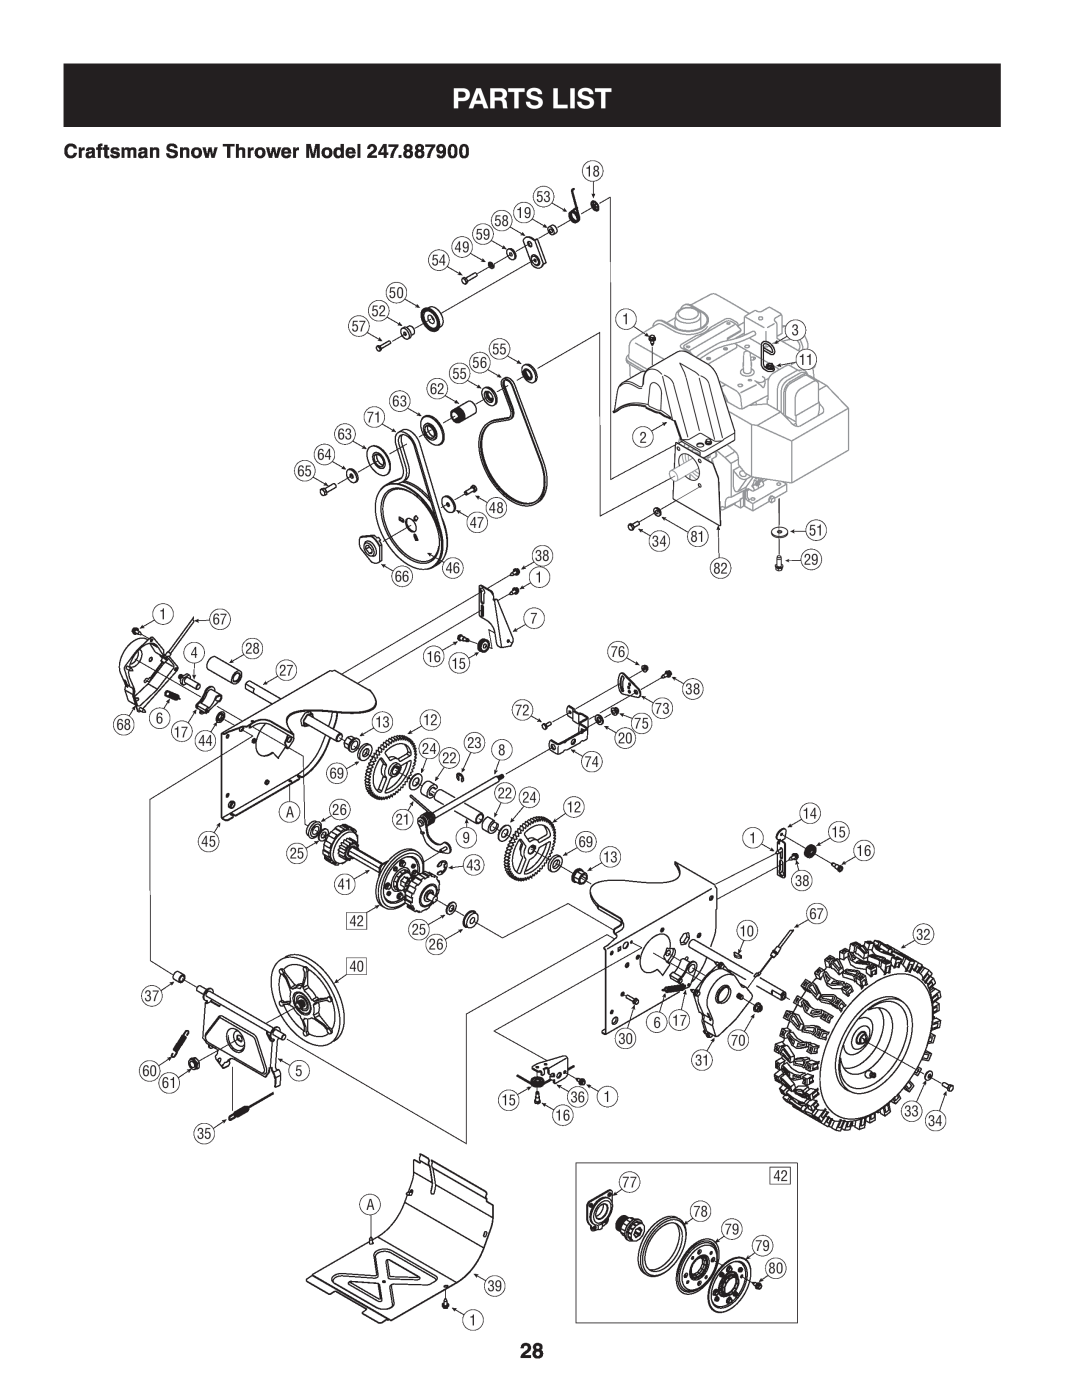 Sears 247.8879 operating instructions Parts List, Craftsman Snow Thrower Model 